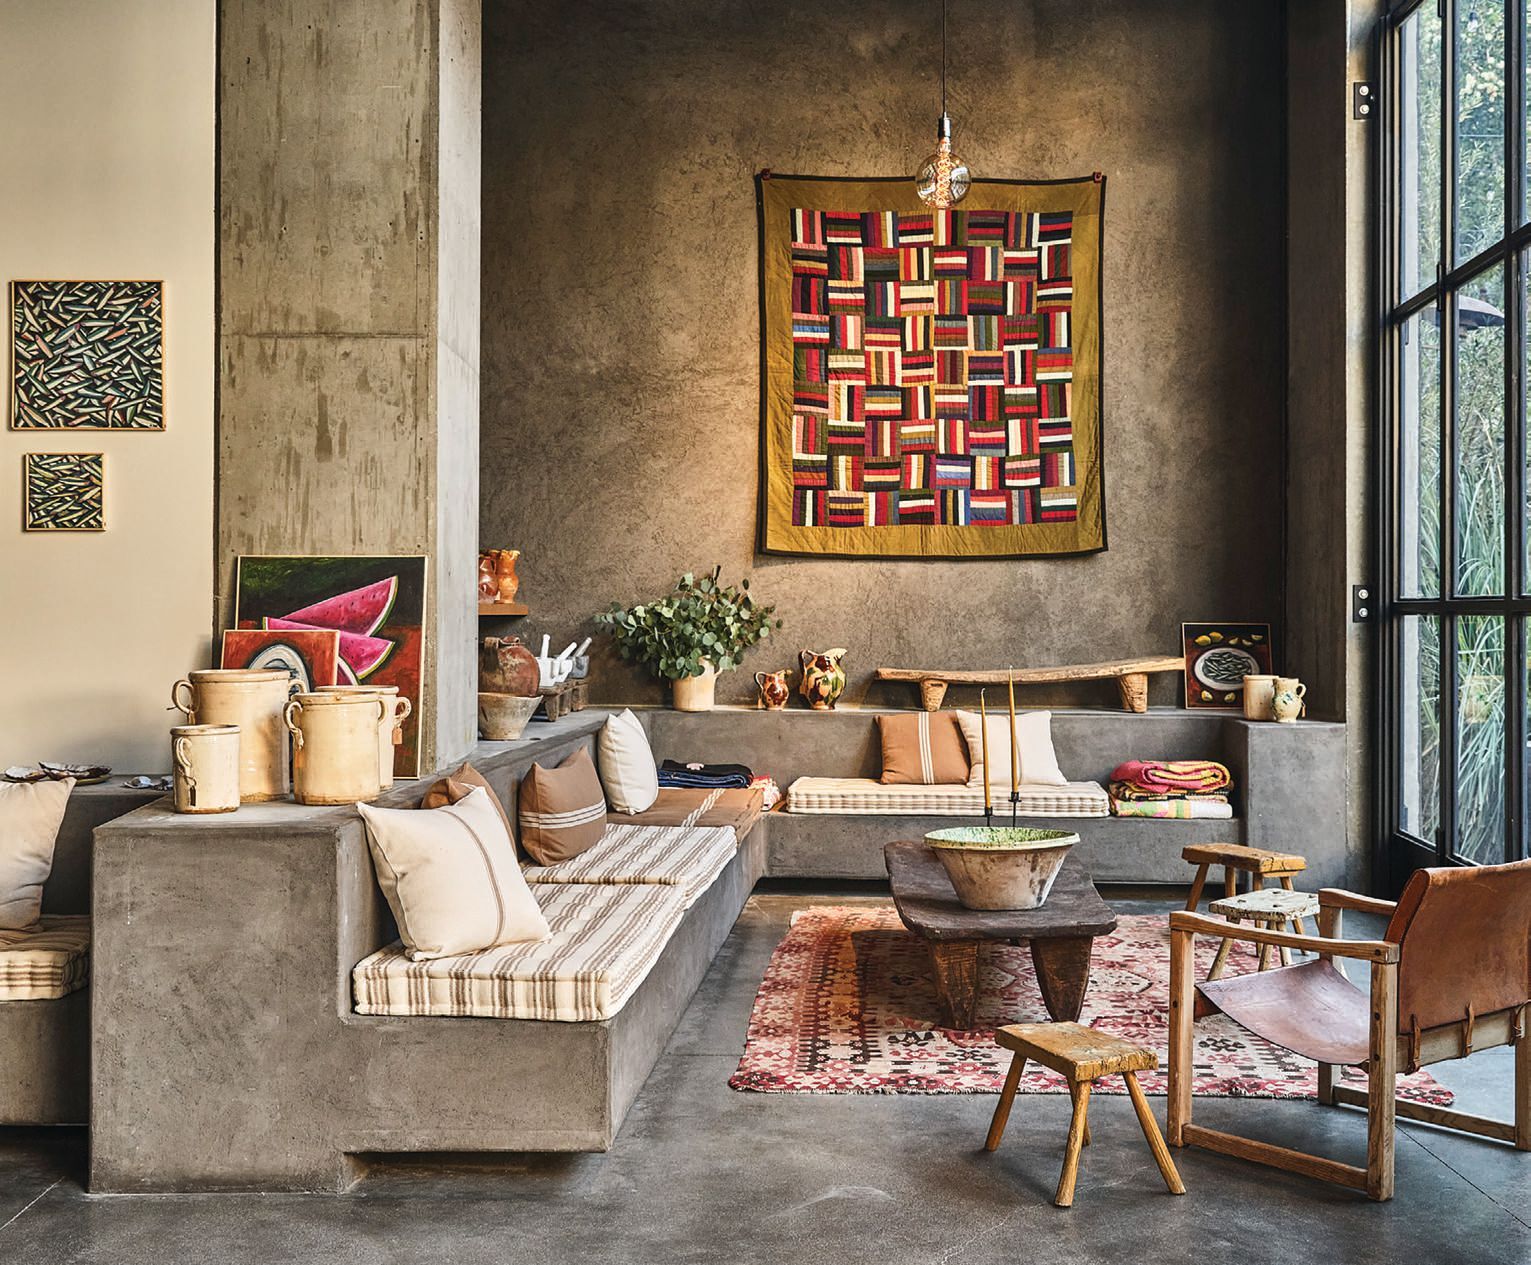 Il Buco Vita, which recently opened a permanent shop at Platform LA, carries handmade Italian ceramics, glassware, linens and more, including rare vintage quilts from the coowner’s personal collection PHOTO BY: THE INGALLS